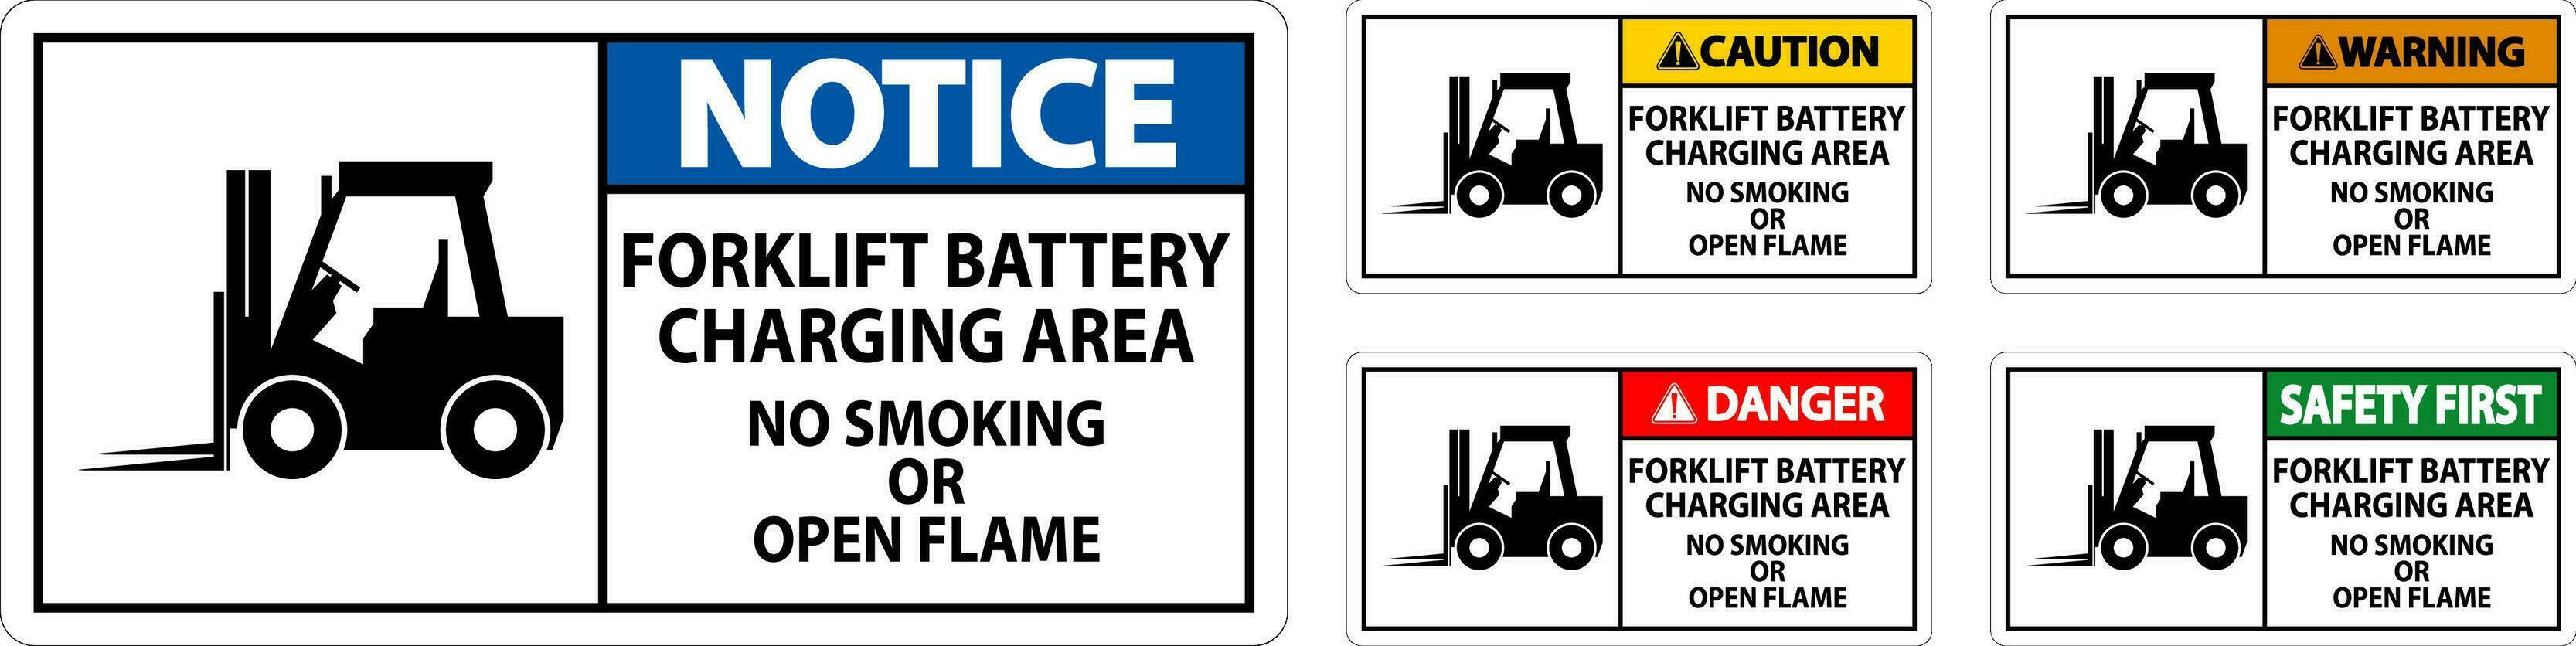 Danger Sign Forklift Battery Charging Area, No Smoking Or Open Flame vector